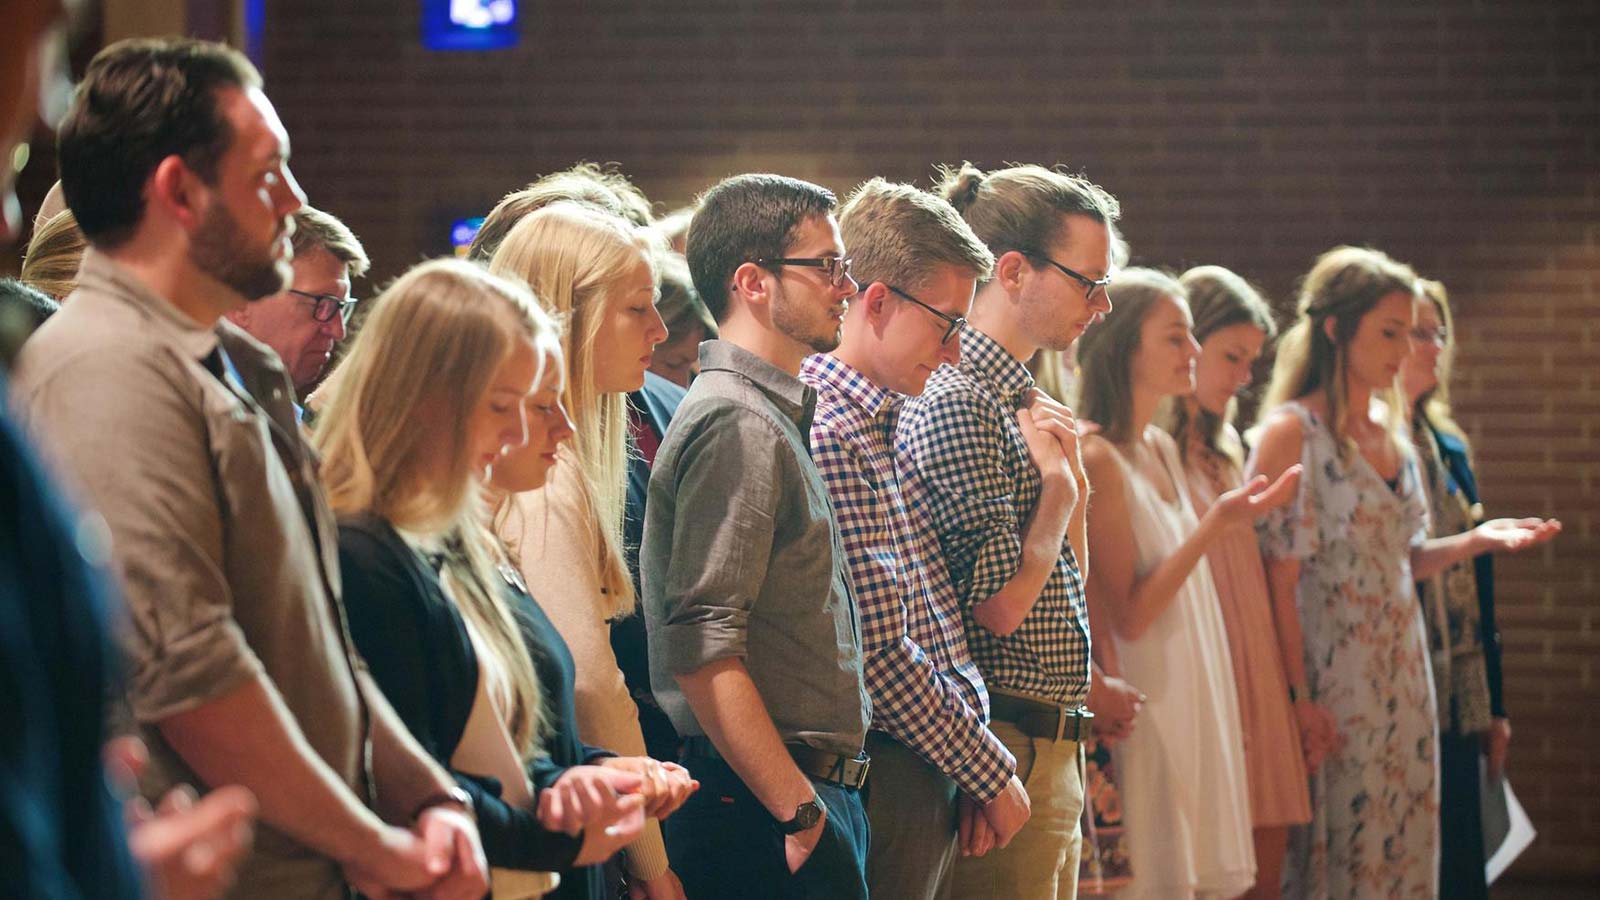 Students in a worship service